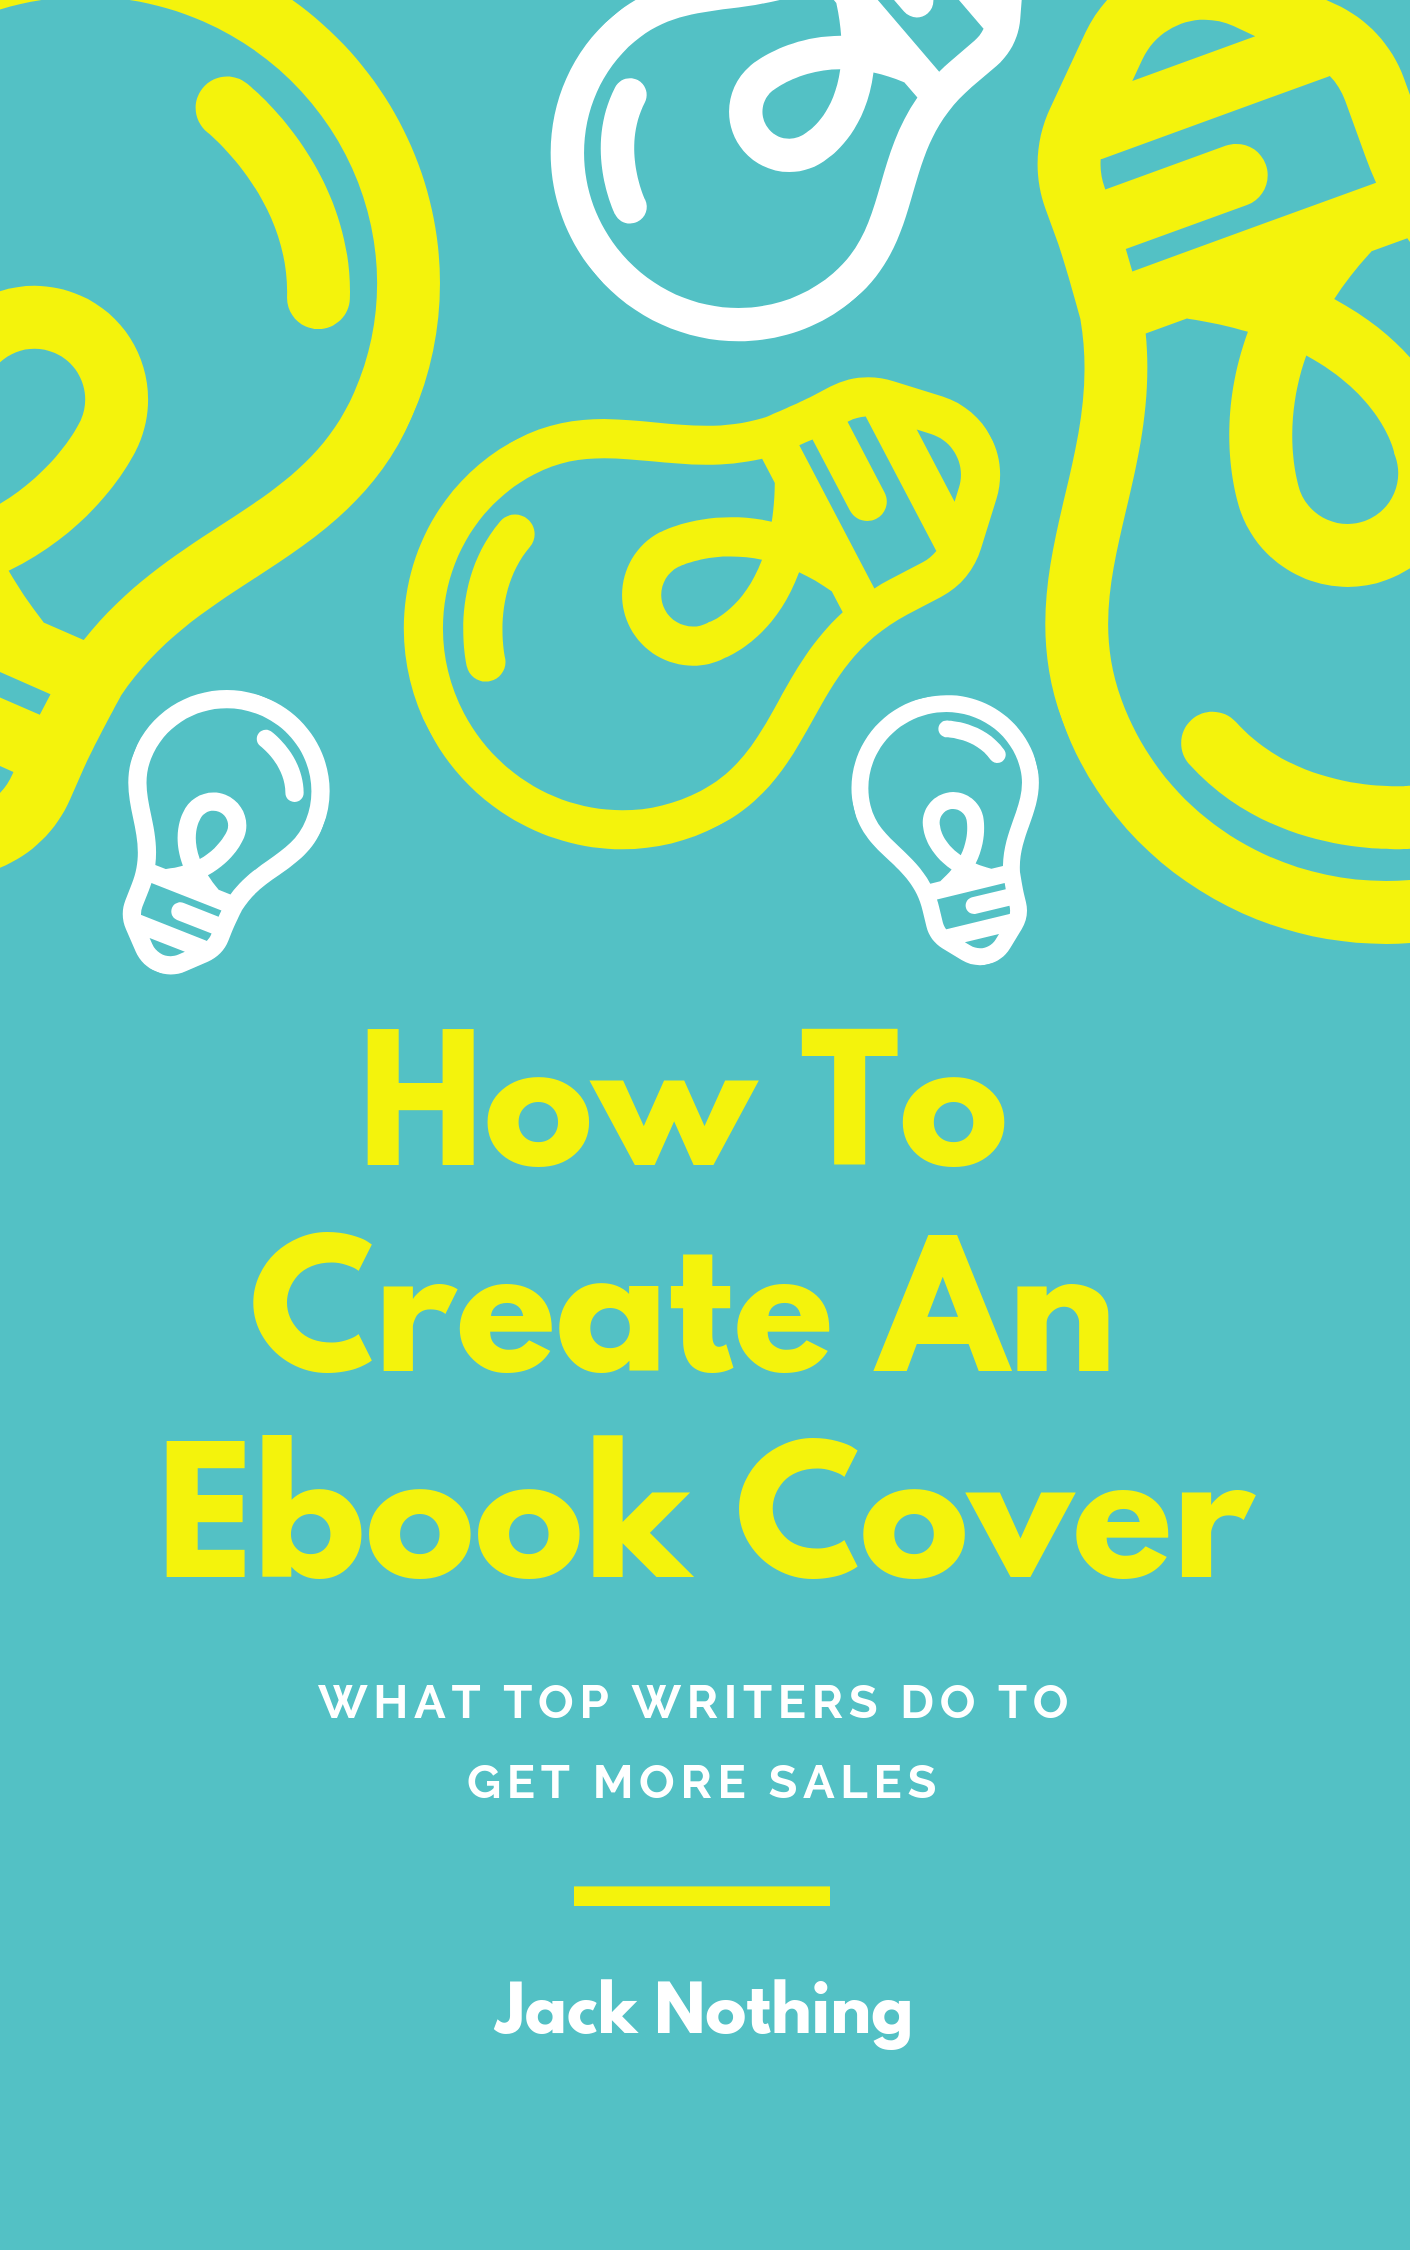 Smashwords How To Create An Ebook Cover A Book By Jack Nothing